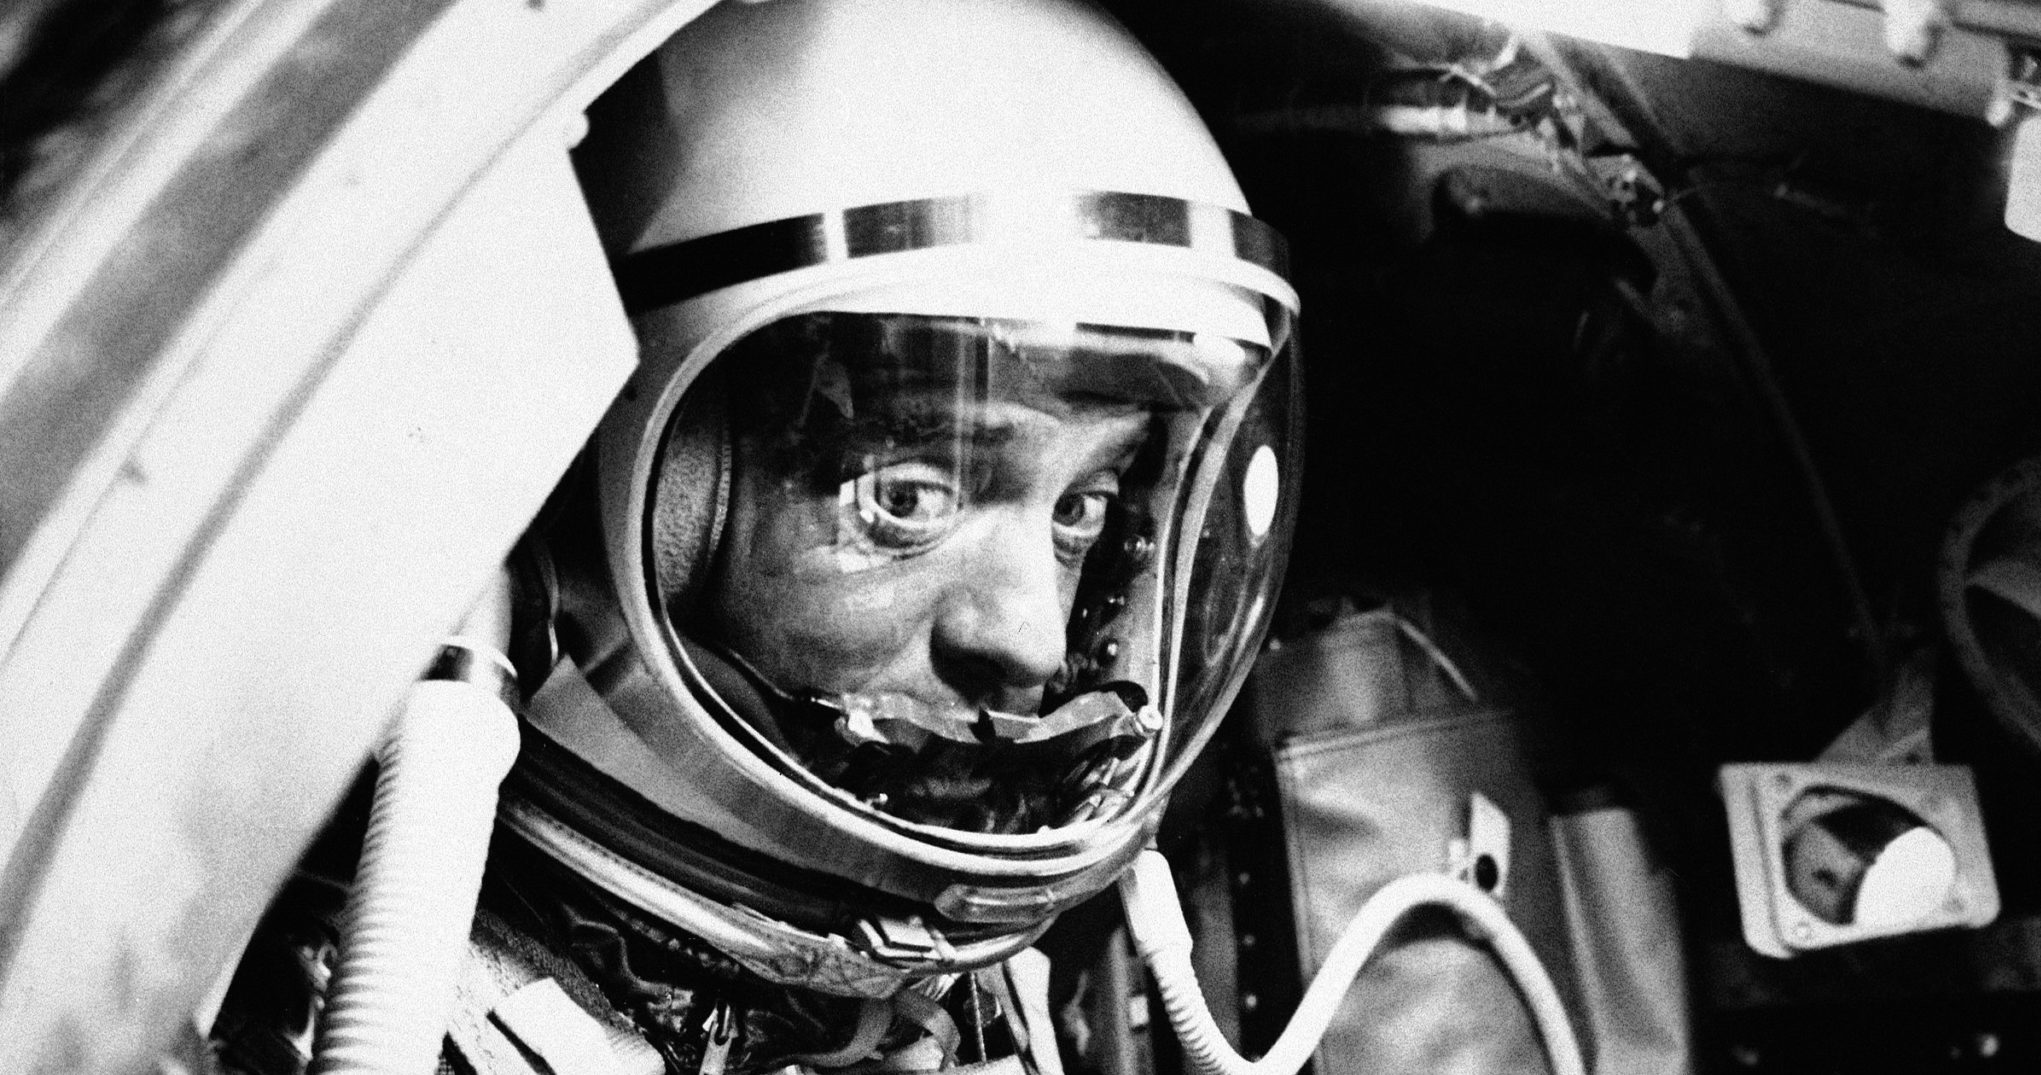 Astronaut Alan Shepard sits in his capsule at Cape Canaveral, Florida, on May 5, 1961.